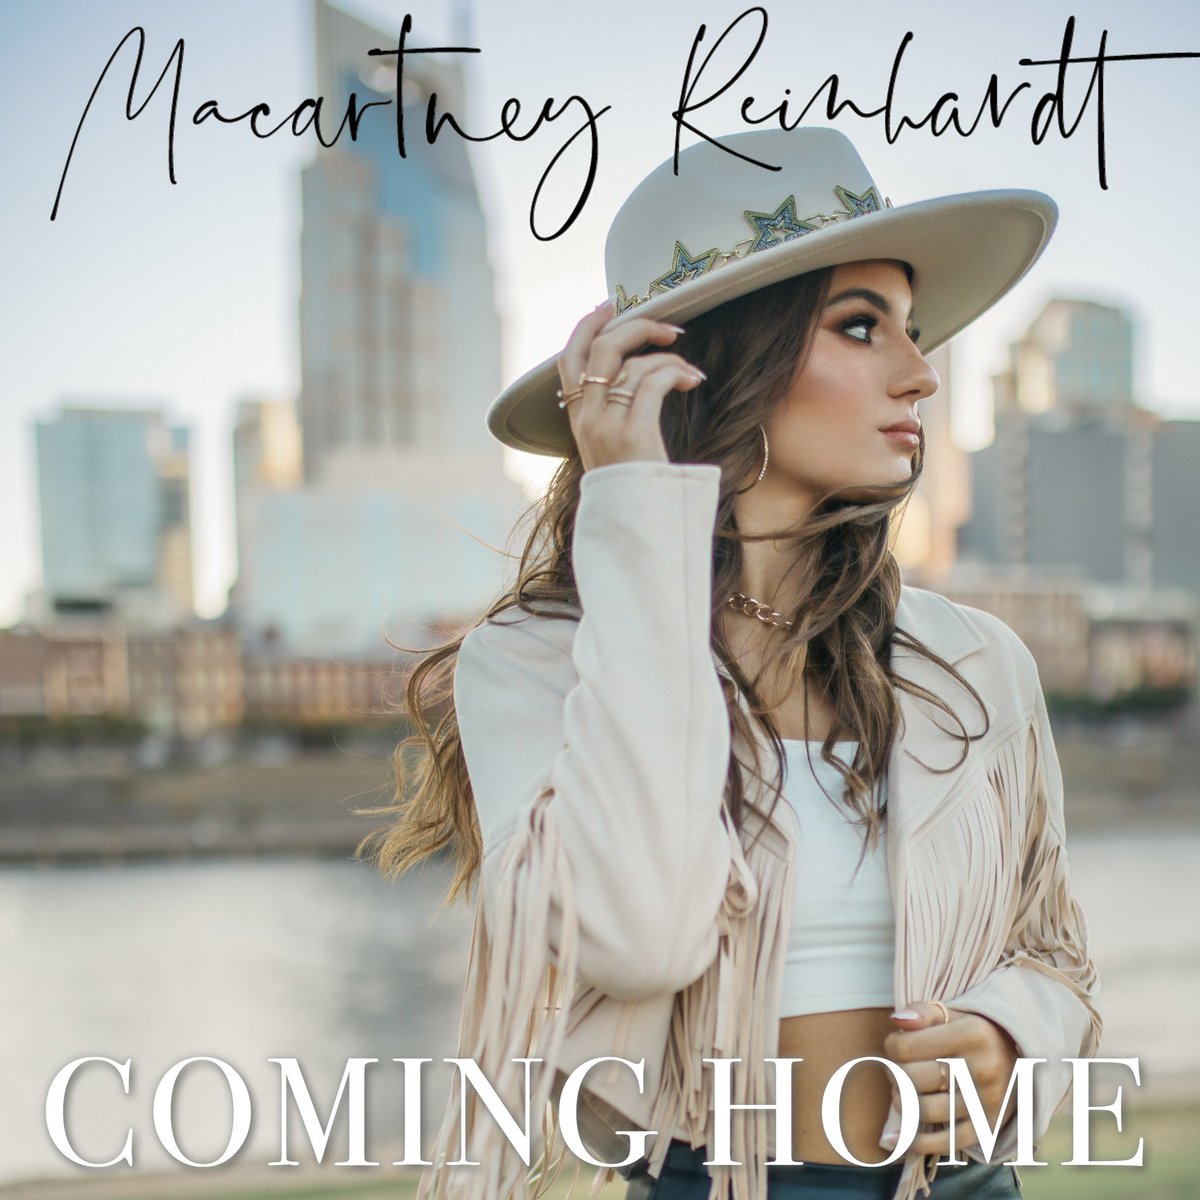 “COMING HOME” OUT NOW ON ALL PLATFORMS!!! So excited to finally be able to share with you guys🖤 This song was written with my friend @_AllieColleen and holds a really special place in my heart as it tells my journey of moving to Nashville✨ LINK IN BIO
#music #country #singer